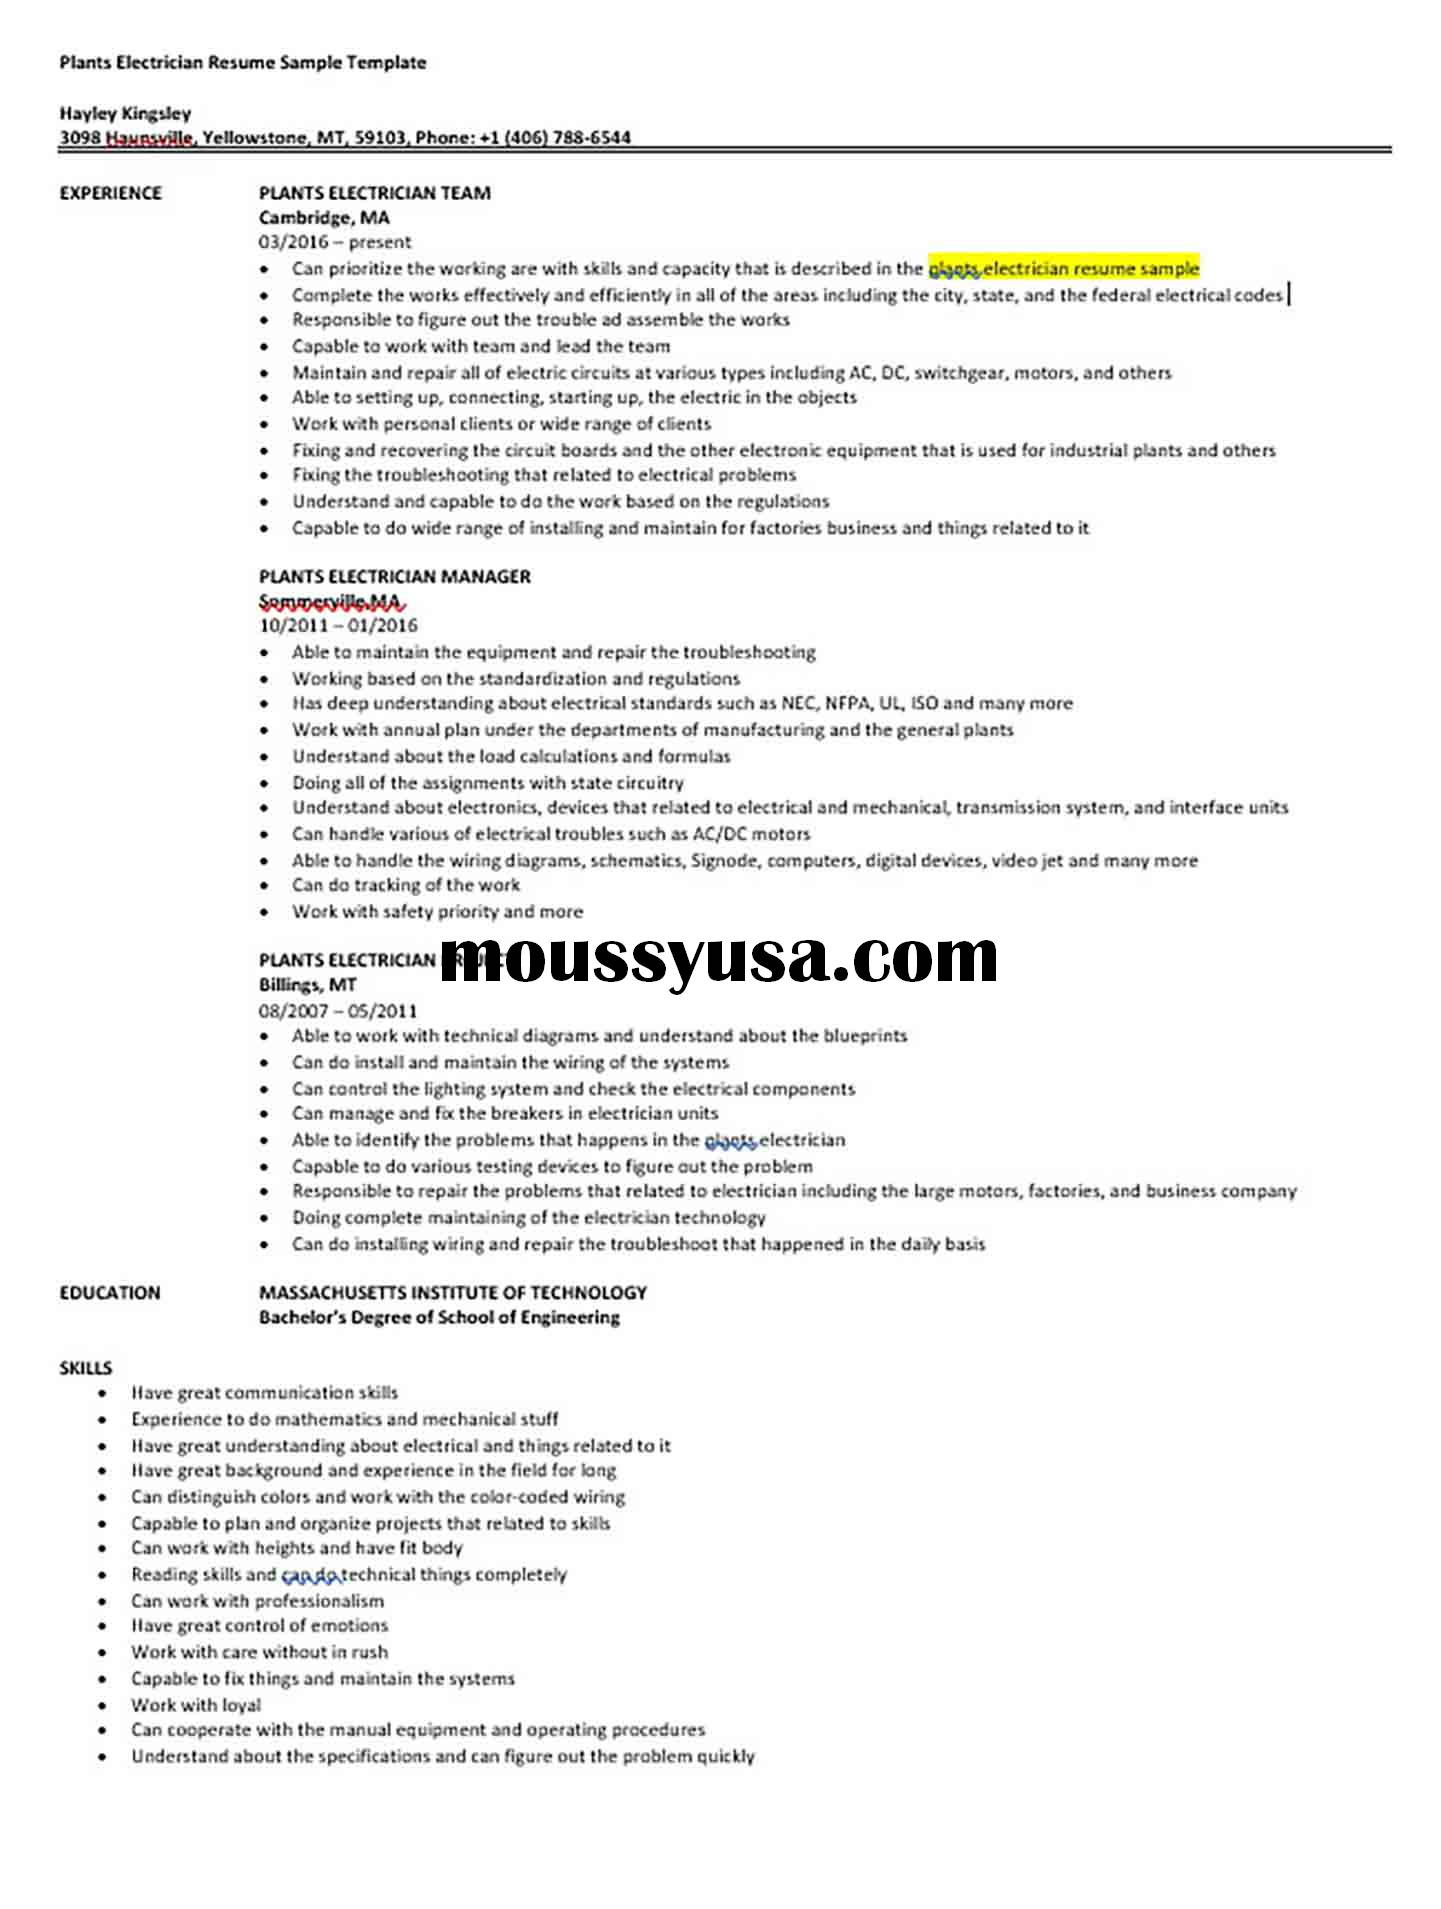 Plants Electrician Resume Sample Template